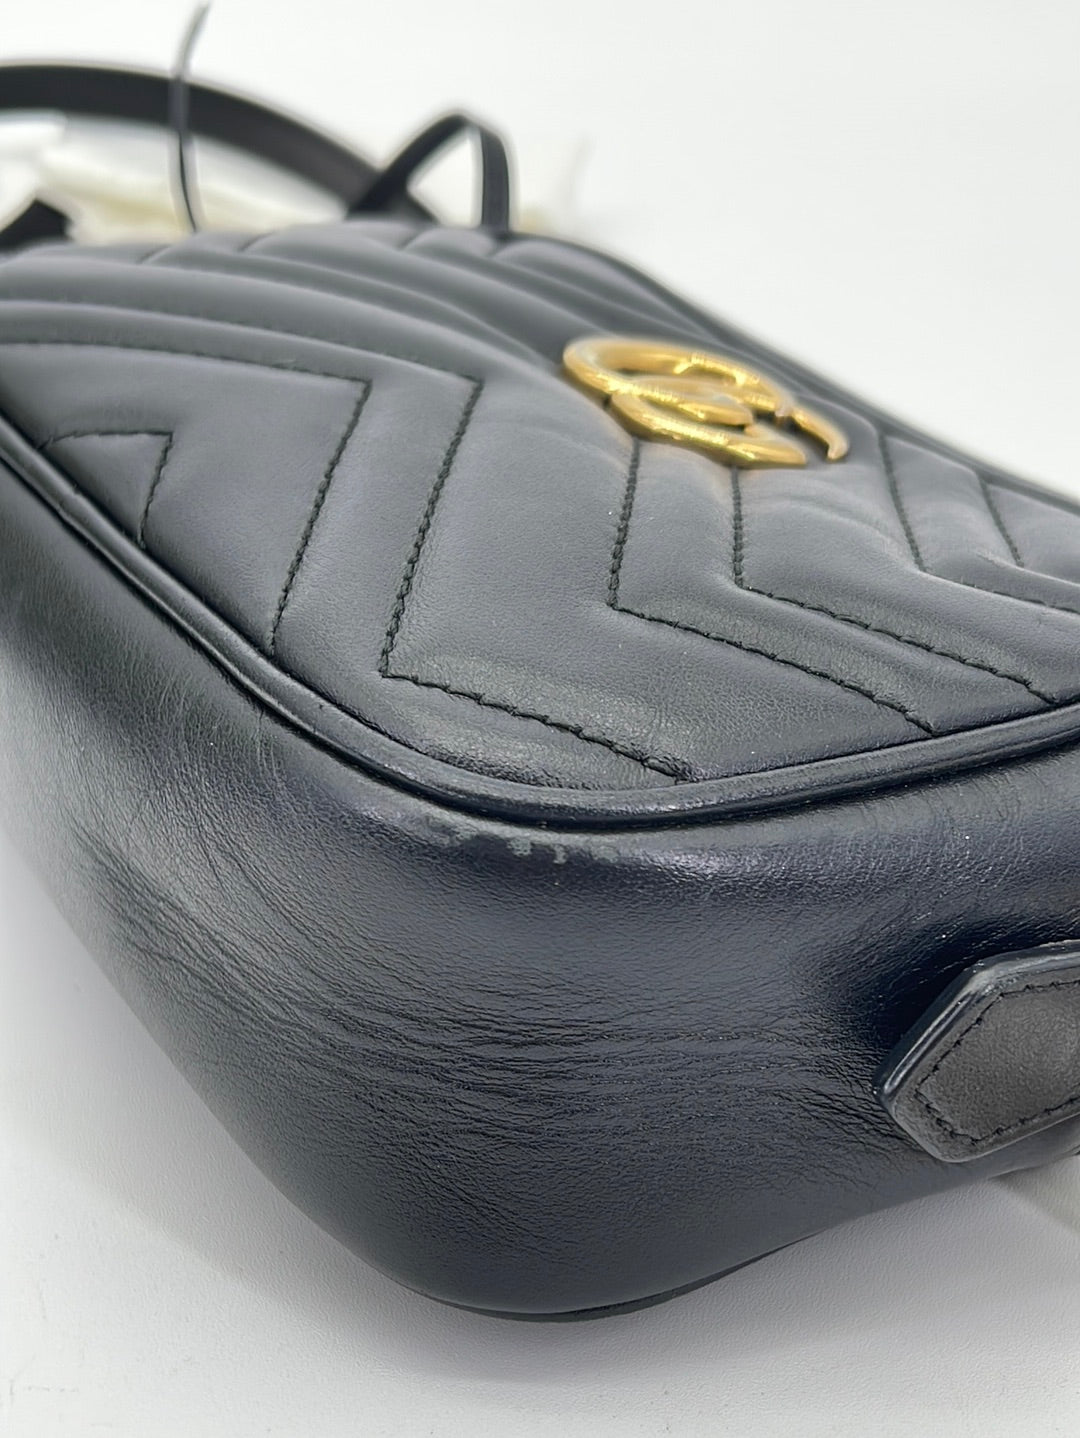 GUCCI Pre-Loved GG Marmont Matelassé Leather Camera Bag